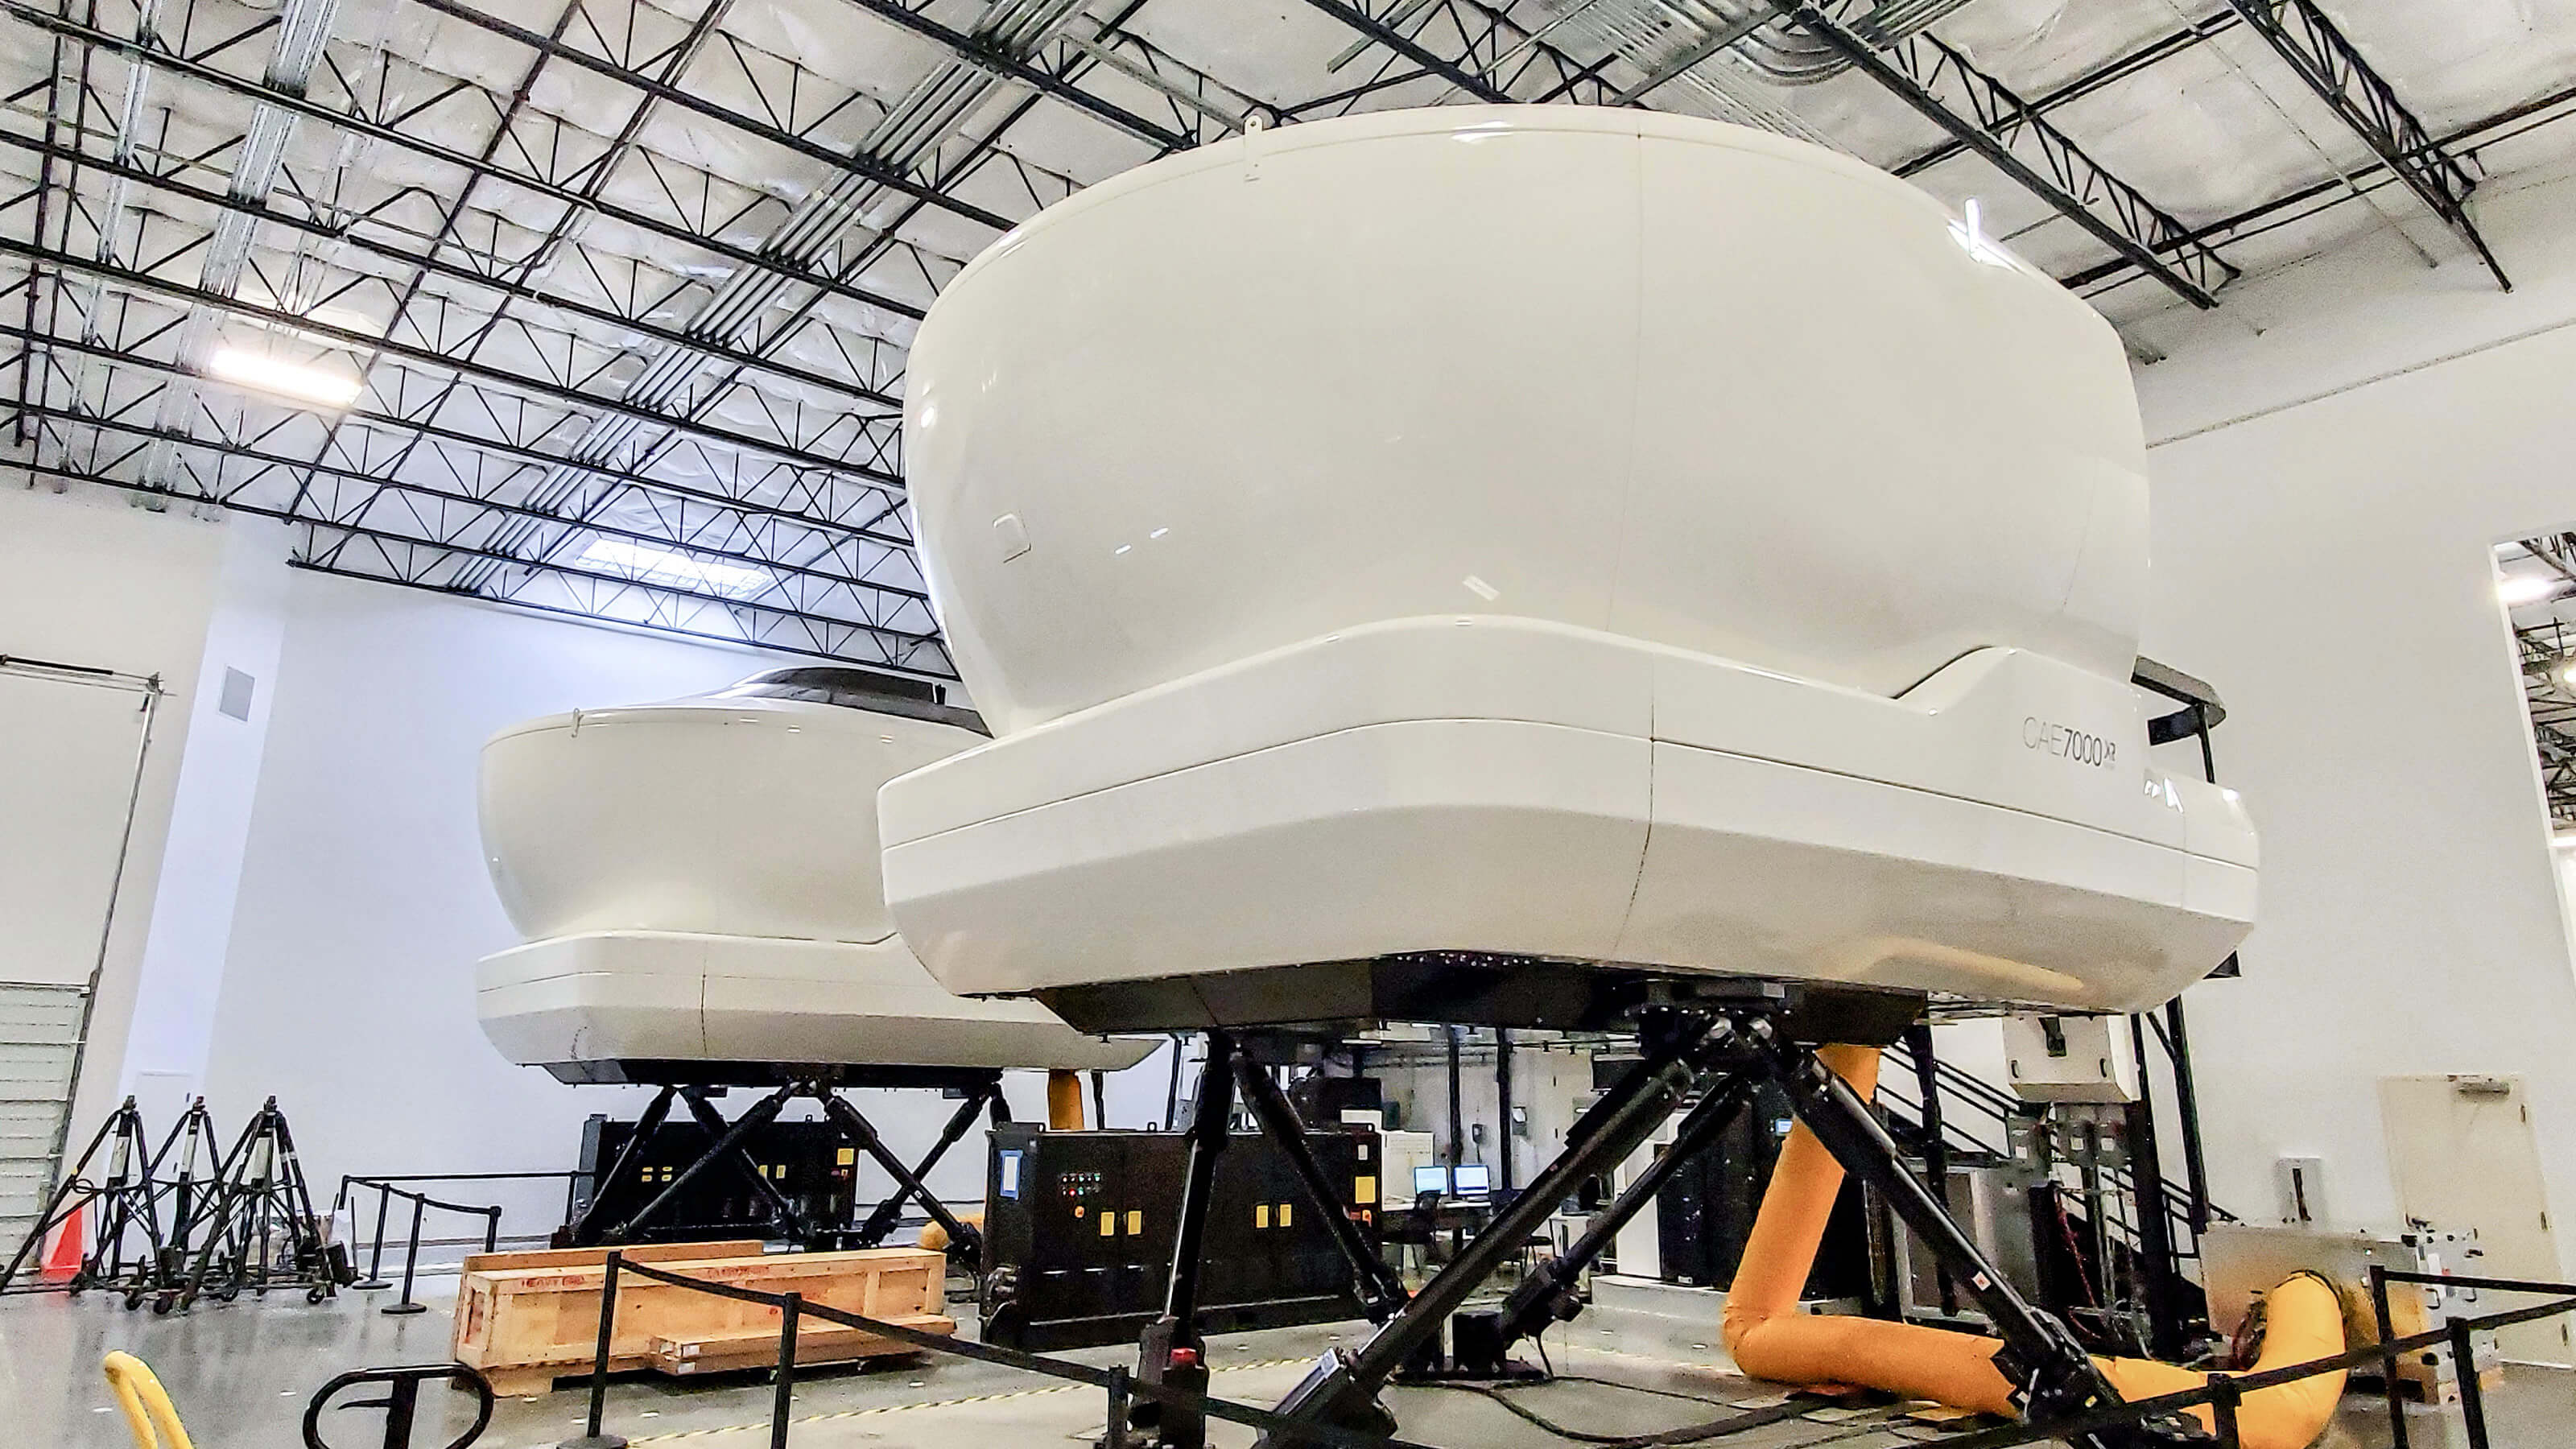 Full motion simulator experience is now included in ATP's program to give graduates the competitive edge.